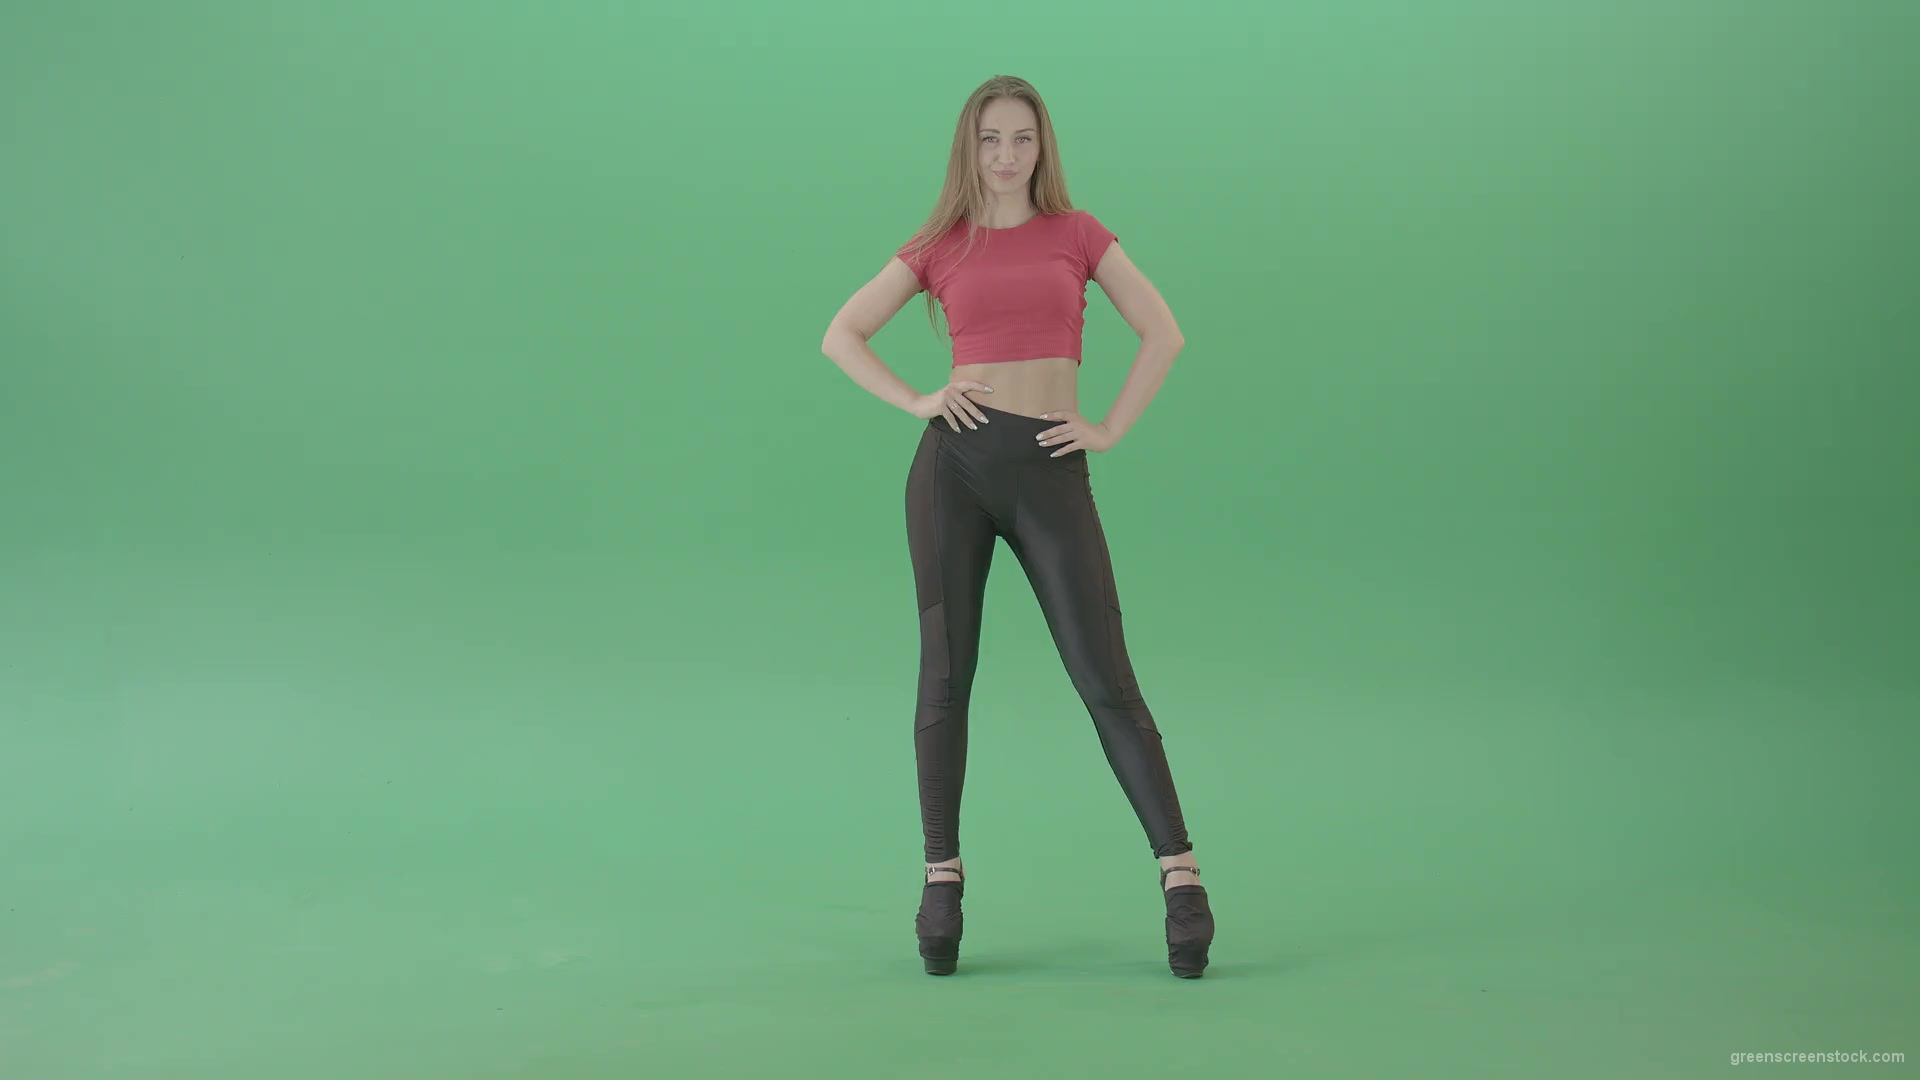 Advertising-Girl-posing-in-front-view-full-size-on-green-screen-4K-Video-Footage-1920_001 Green Screen Stock